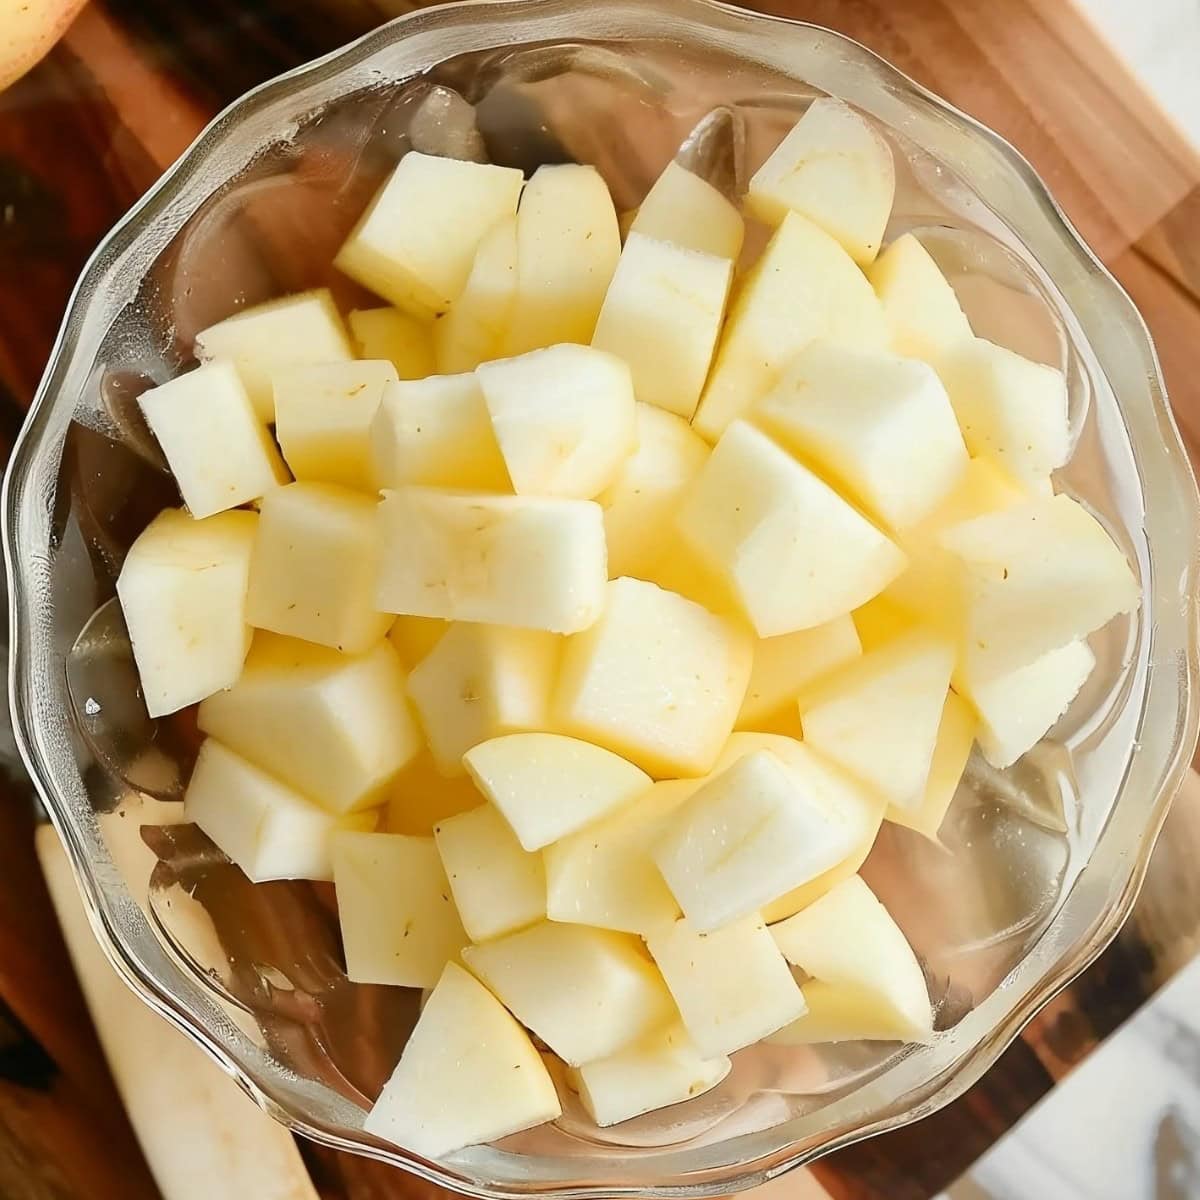 Top View of Peeled and Chopped Apple Pieces in a Glass Dish on a Wooden Cutting Board on a White Marble Table